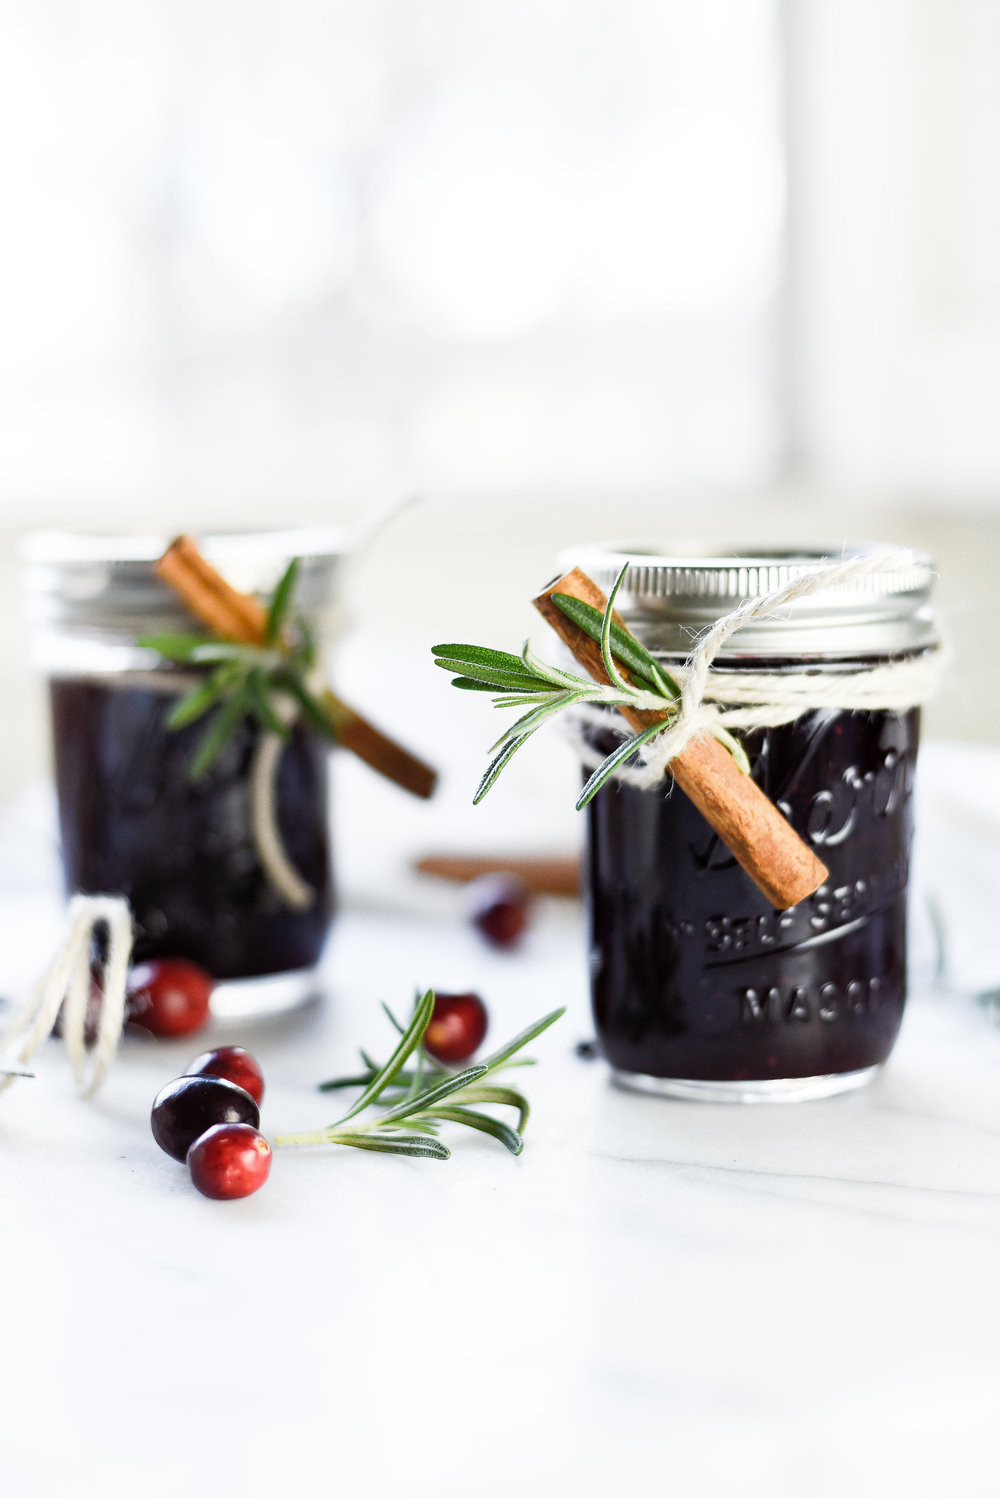 Have some extra fresh summer fruit? Need some of the best canning recipes? We have rounded up some yummy bbq sauce and some unique and gourmet jams. Homemade jams are the best! #jams #jamrecipe #canning #pepperjelly #bbqsauce